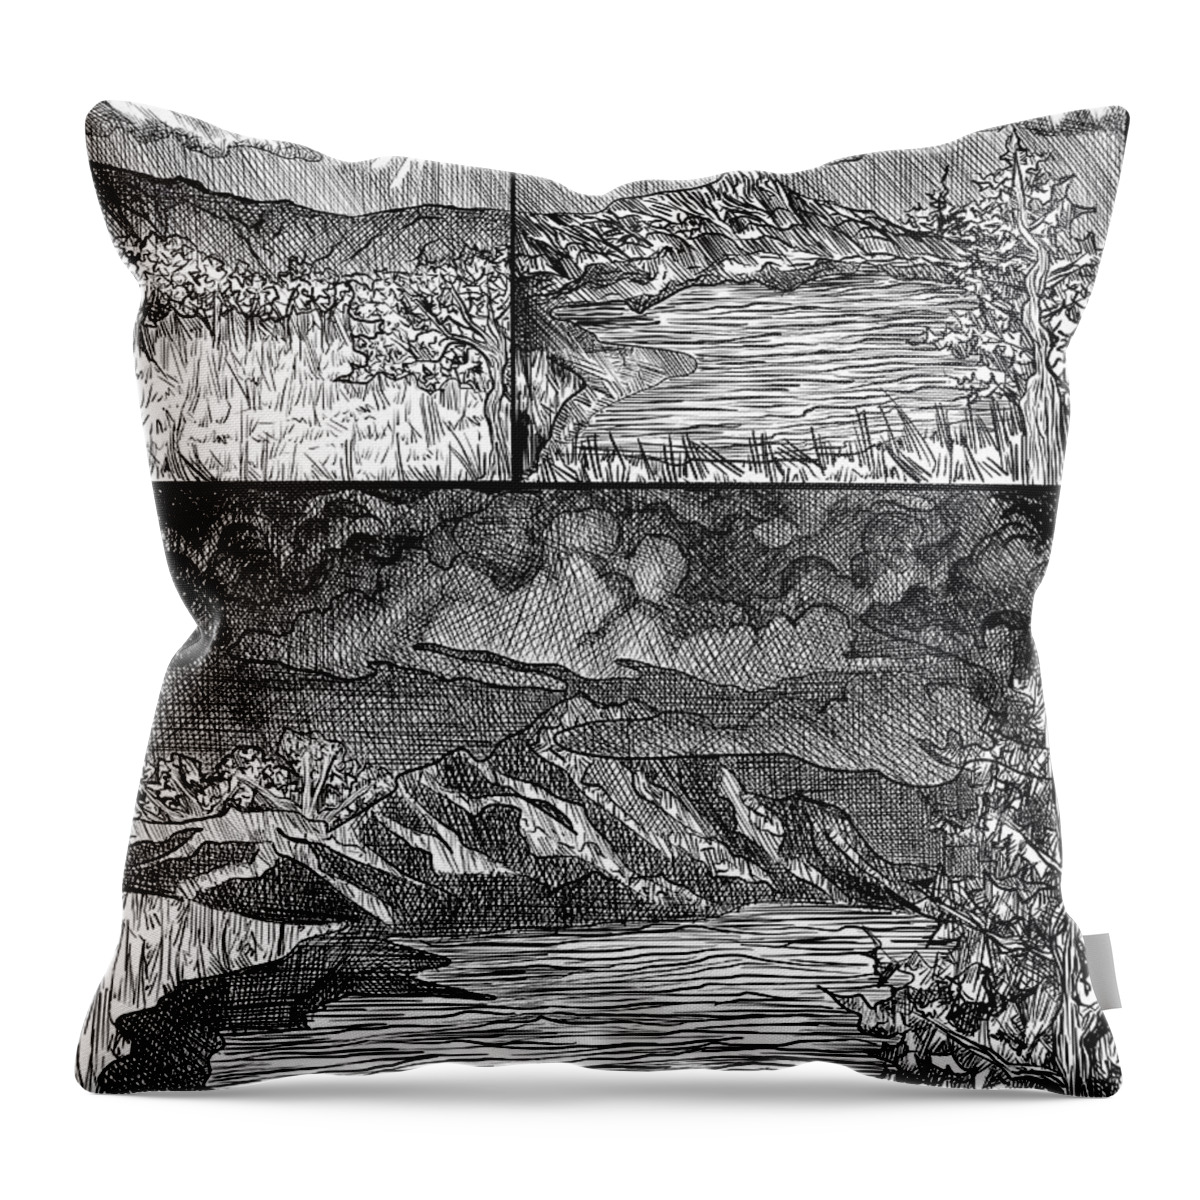 Digital Pen And Ink Throw Pillow featuring the digital art Incoming Storm by Angela Weddle